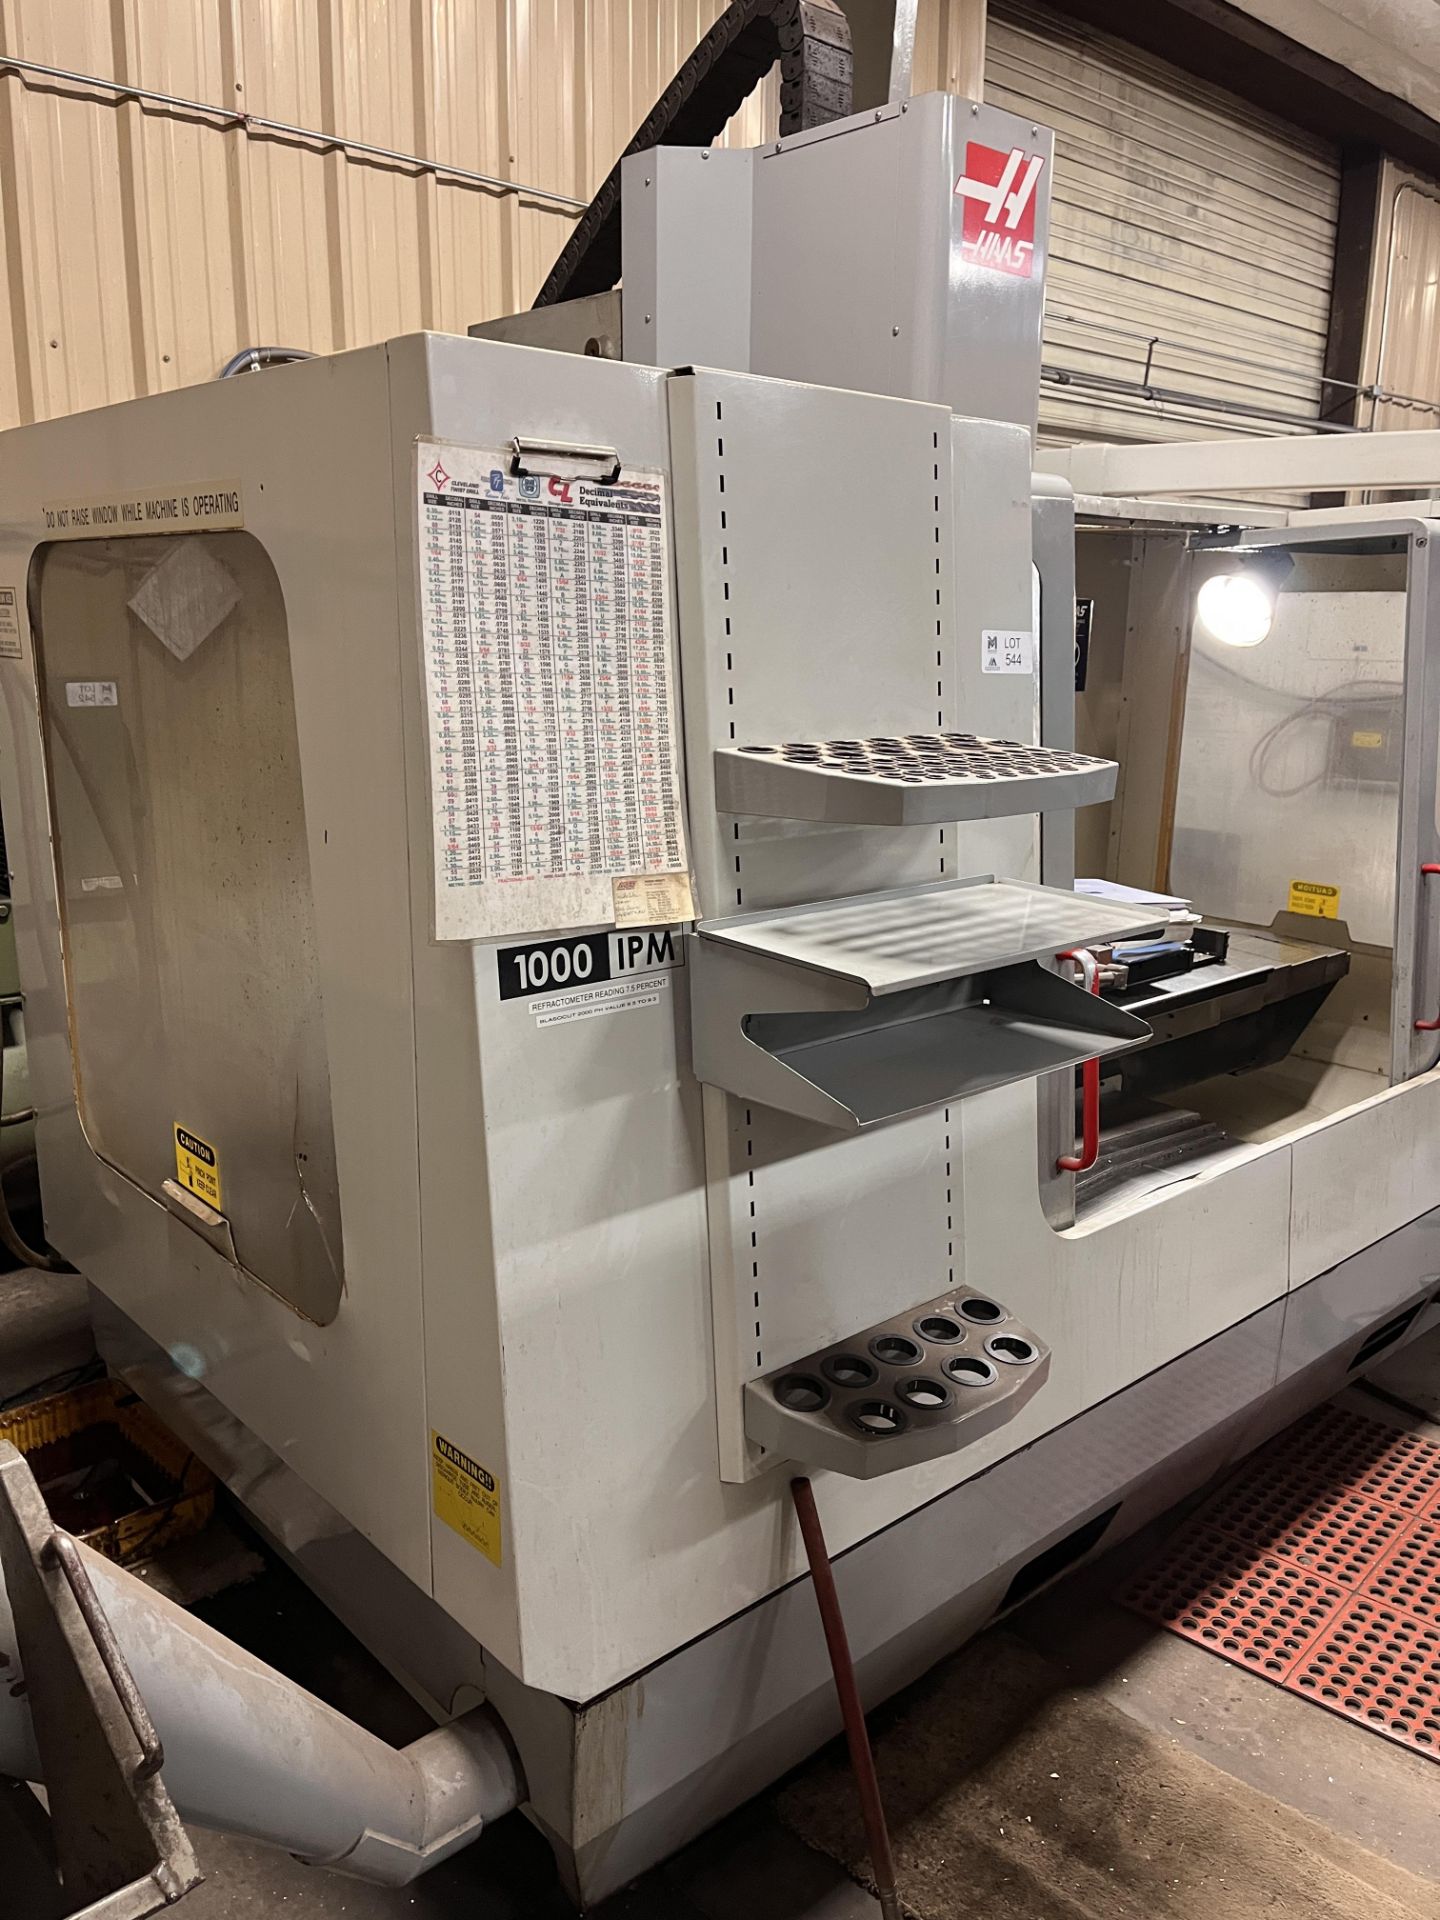 "2002 Haas VF4D CNC Vertical Machining Center, ONLY 4773 hrs, See Lots 545-567 for tooling - Image 2 of 27